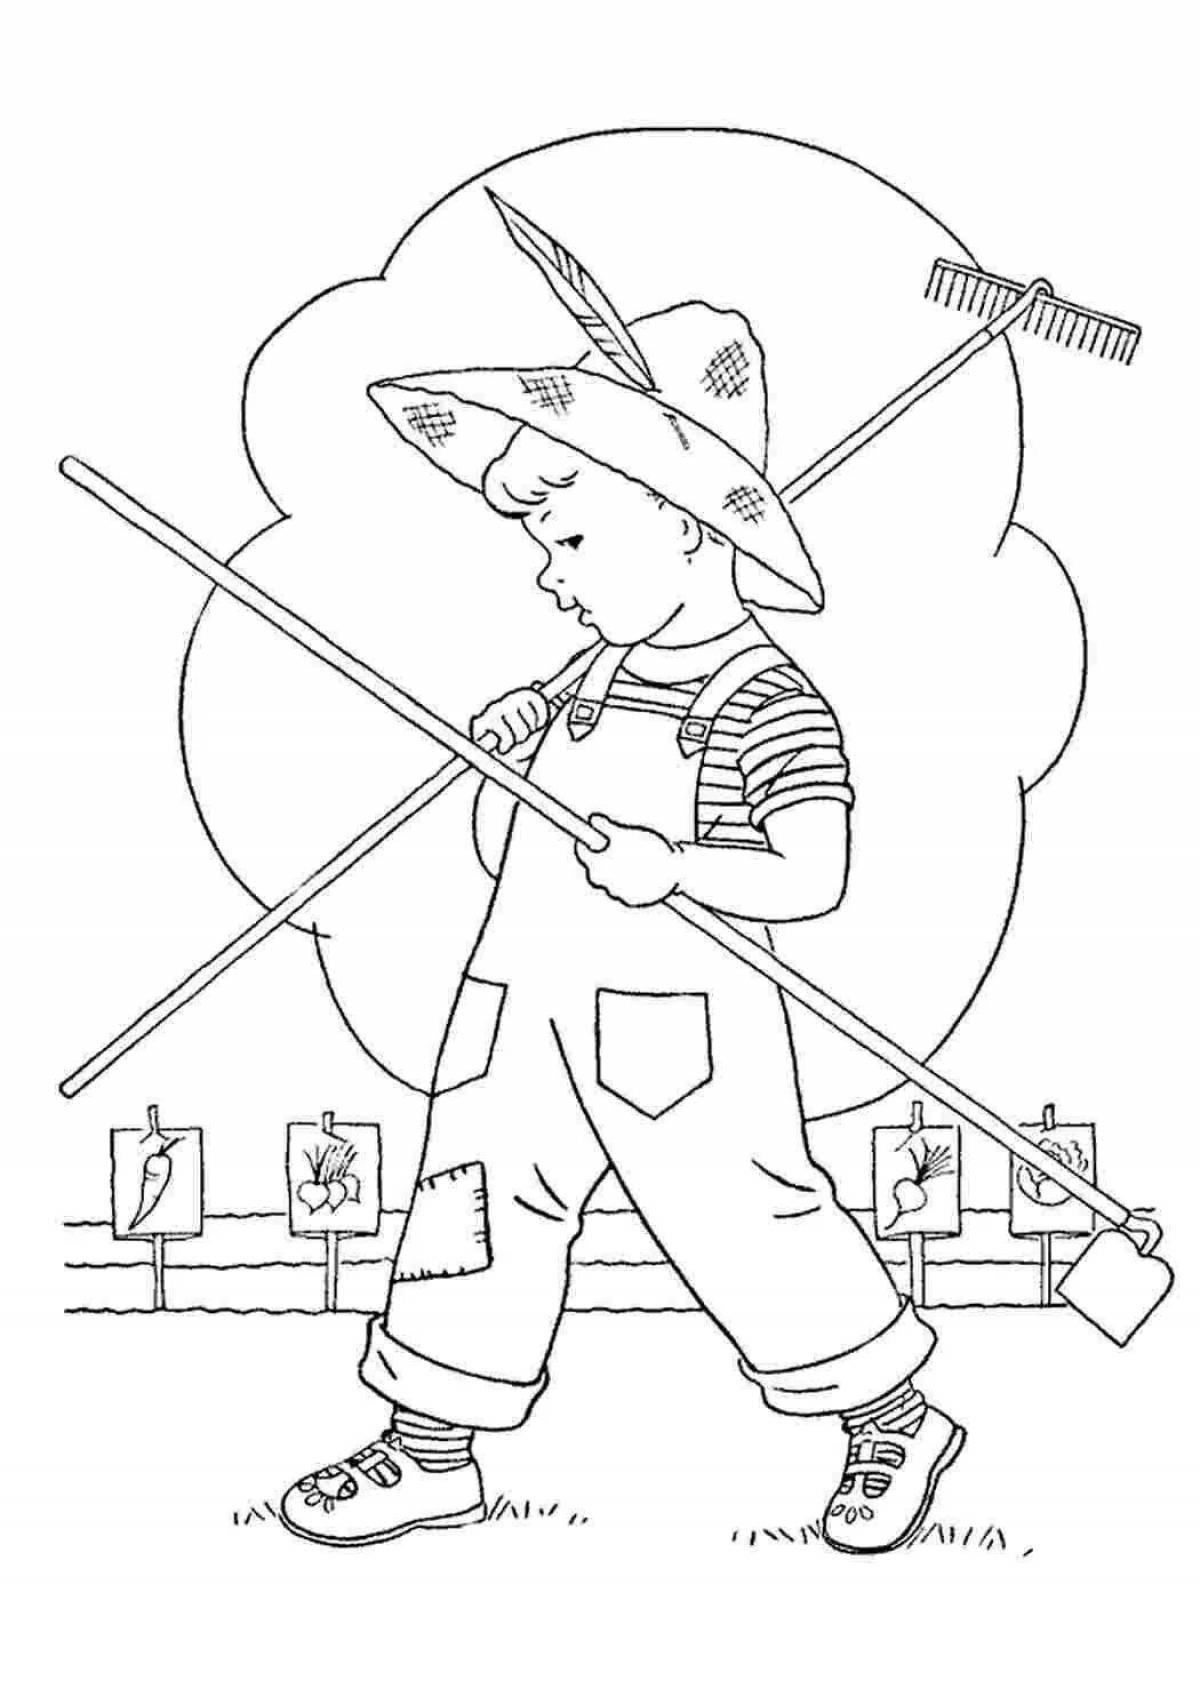 Educational labor protection through the eyes of children for preschoolers